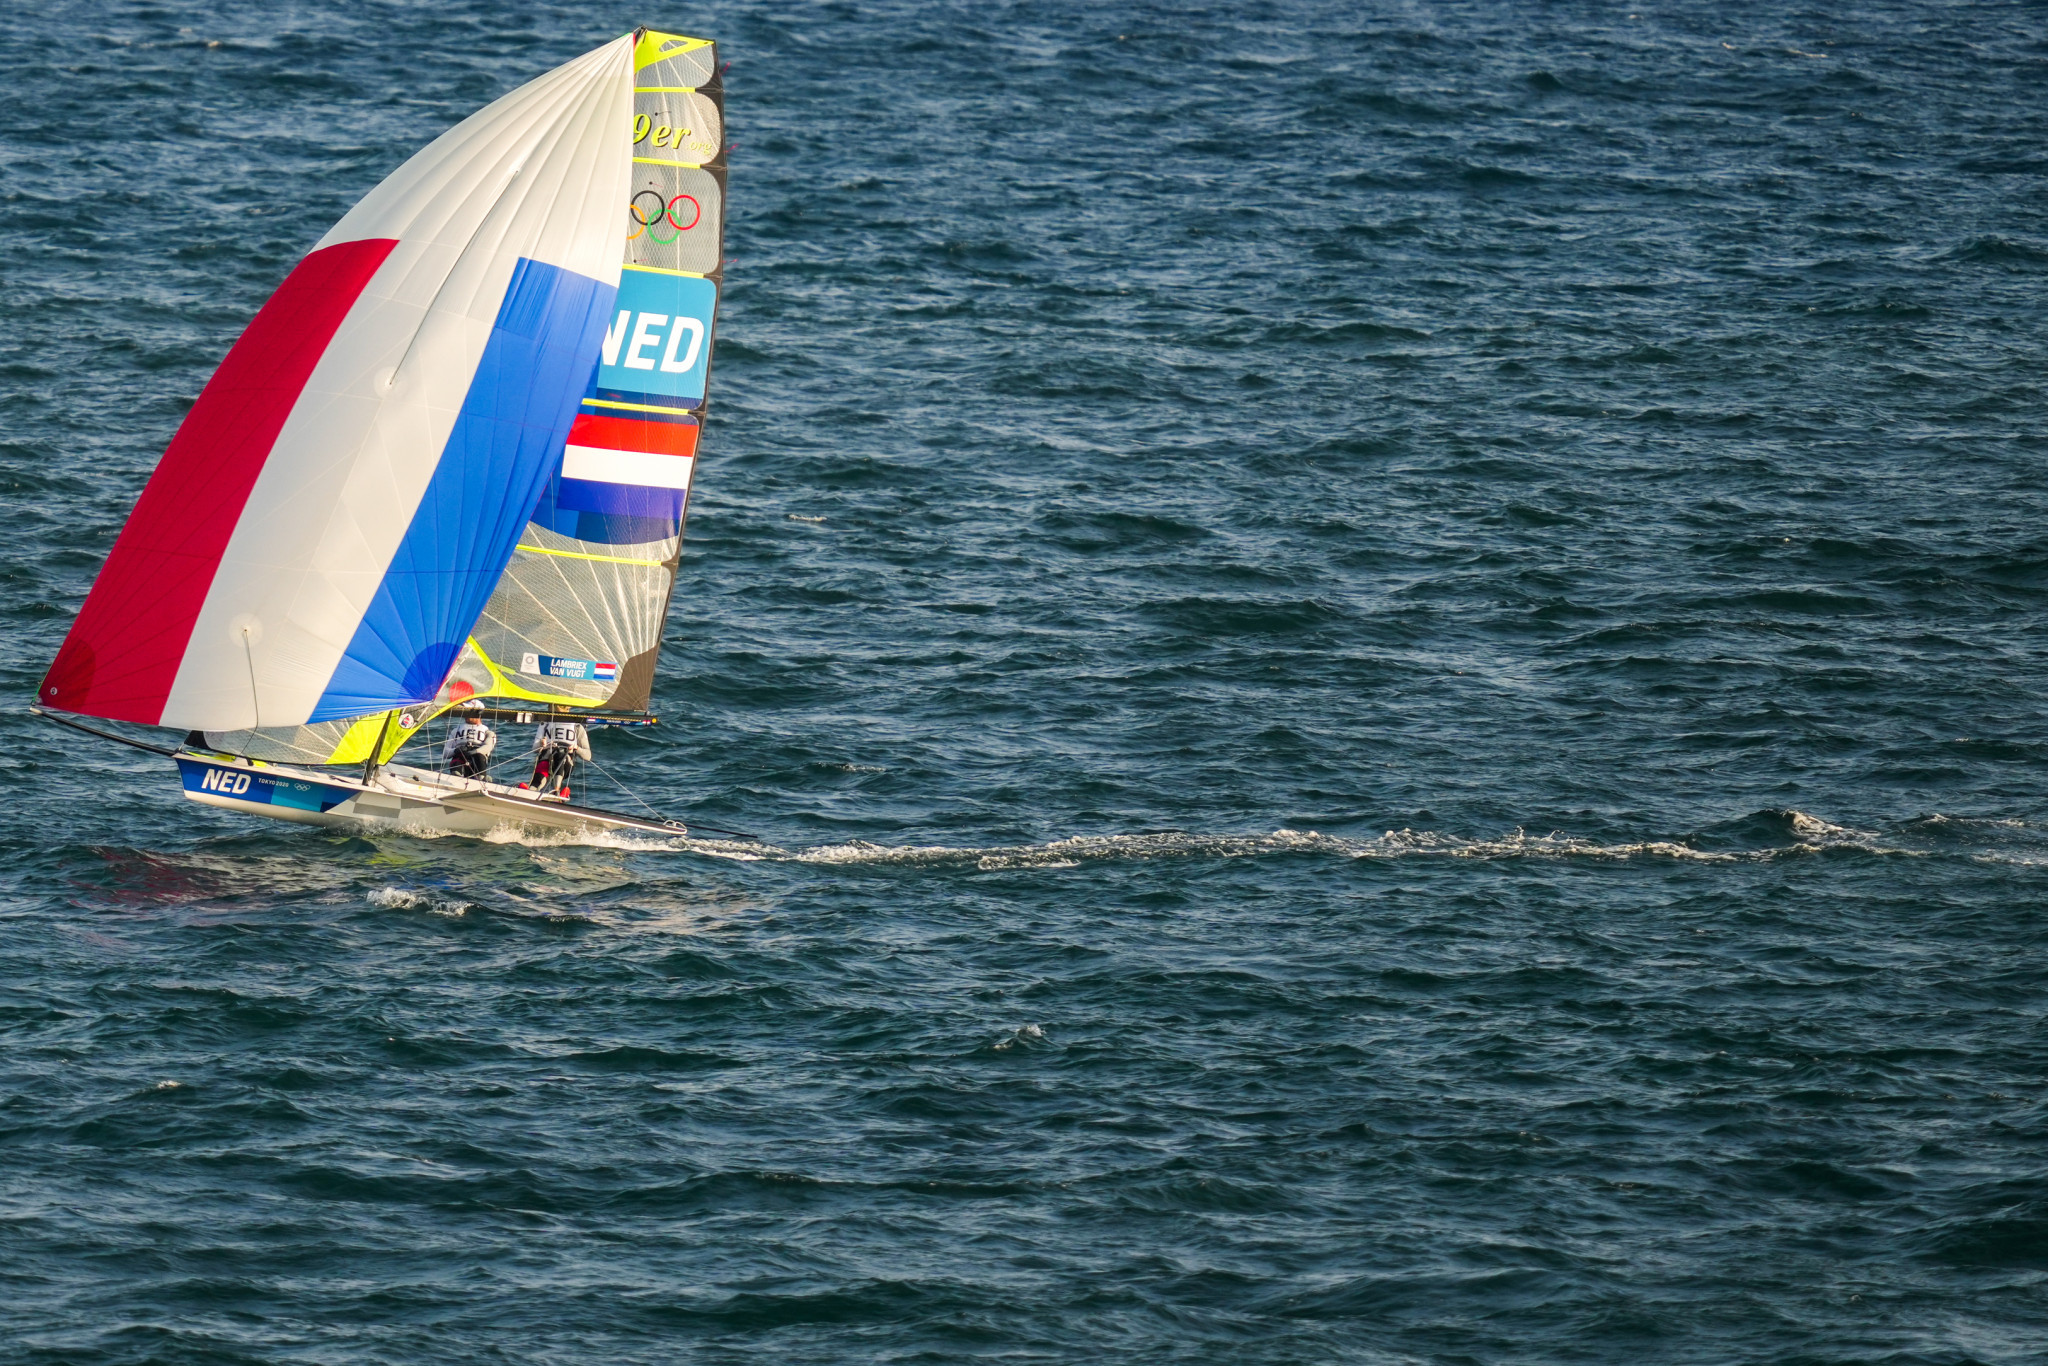 Dutch celebrate double success at 49er, 49erFX and Nacra 17 World Championships